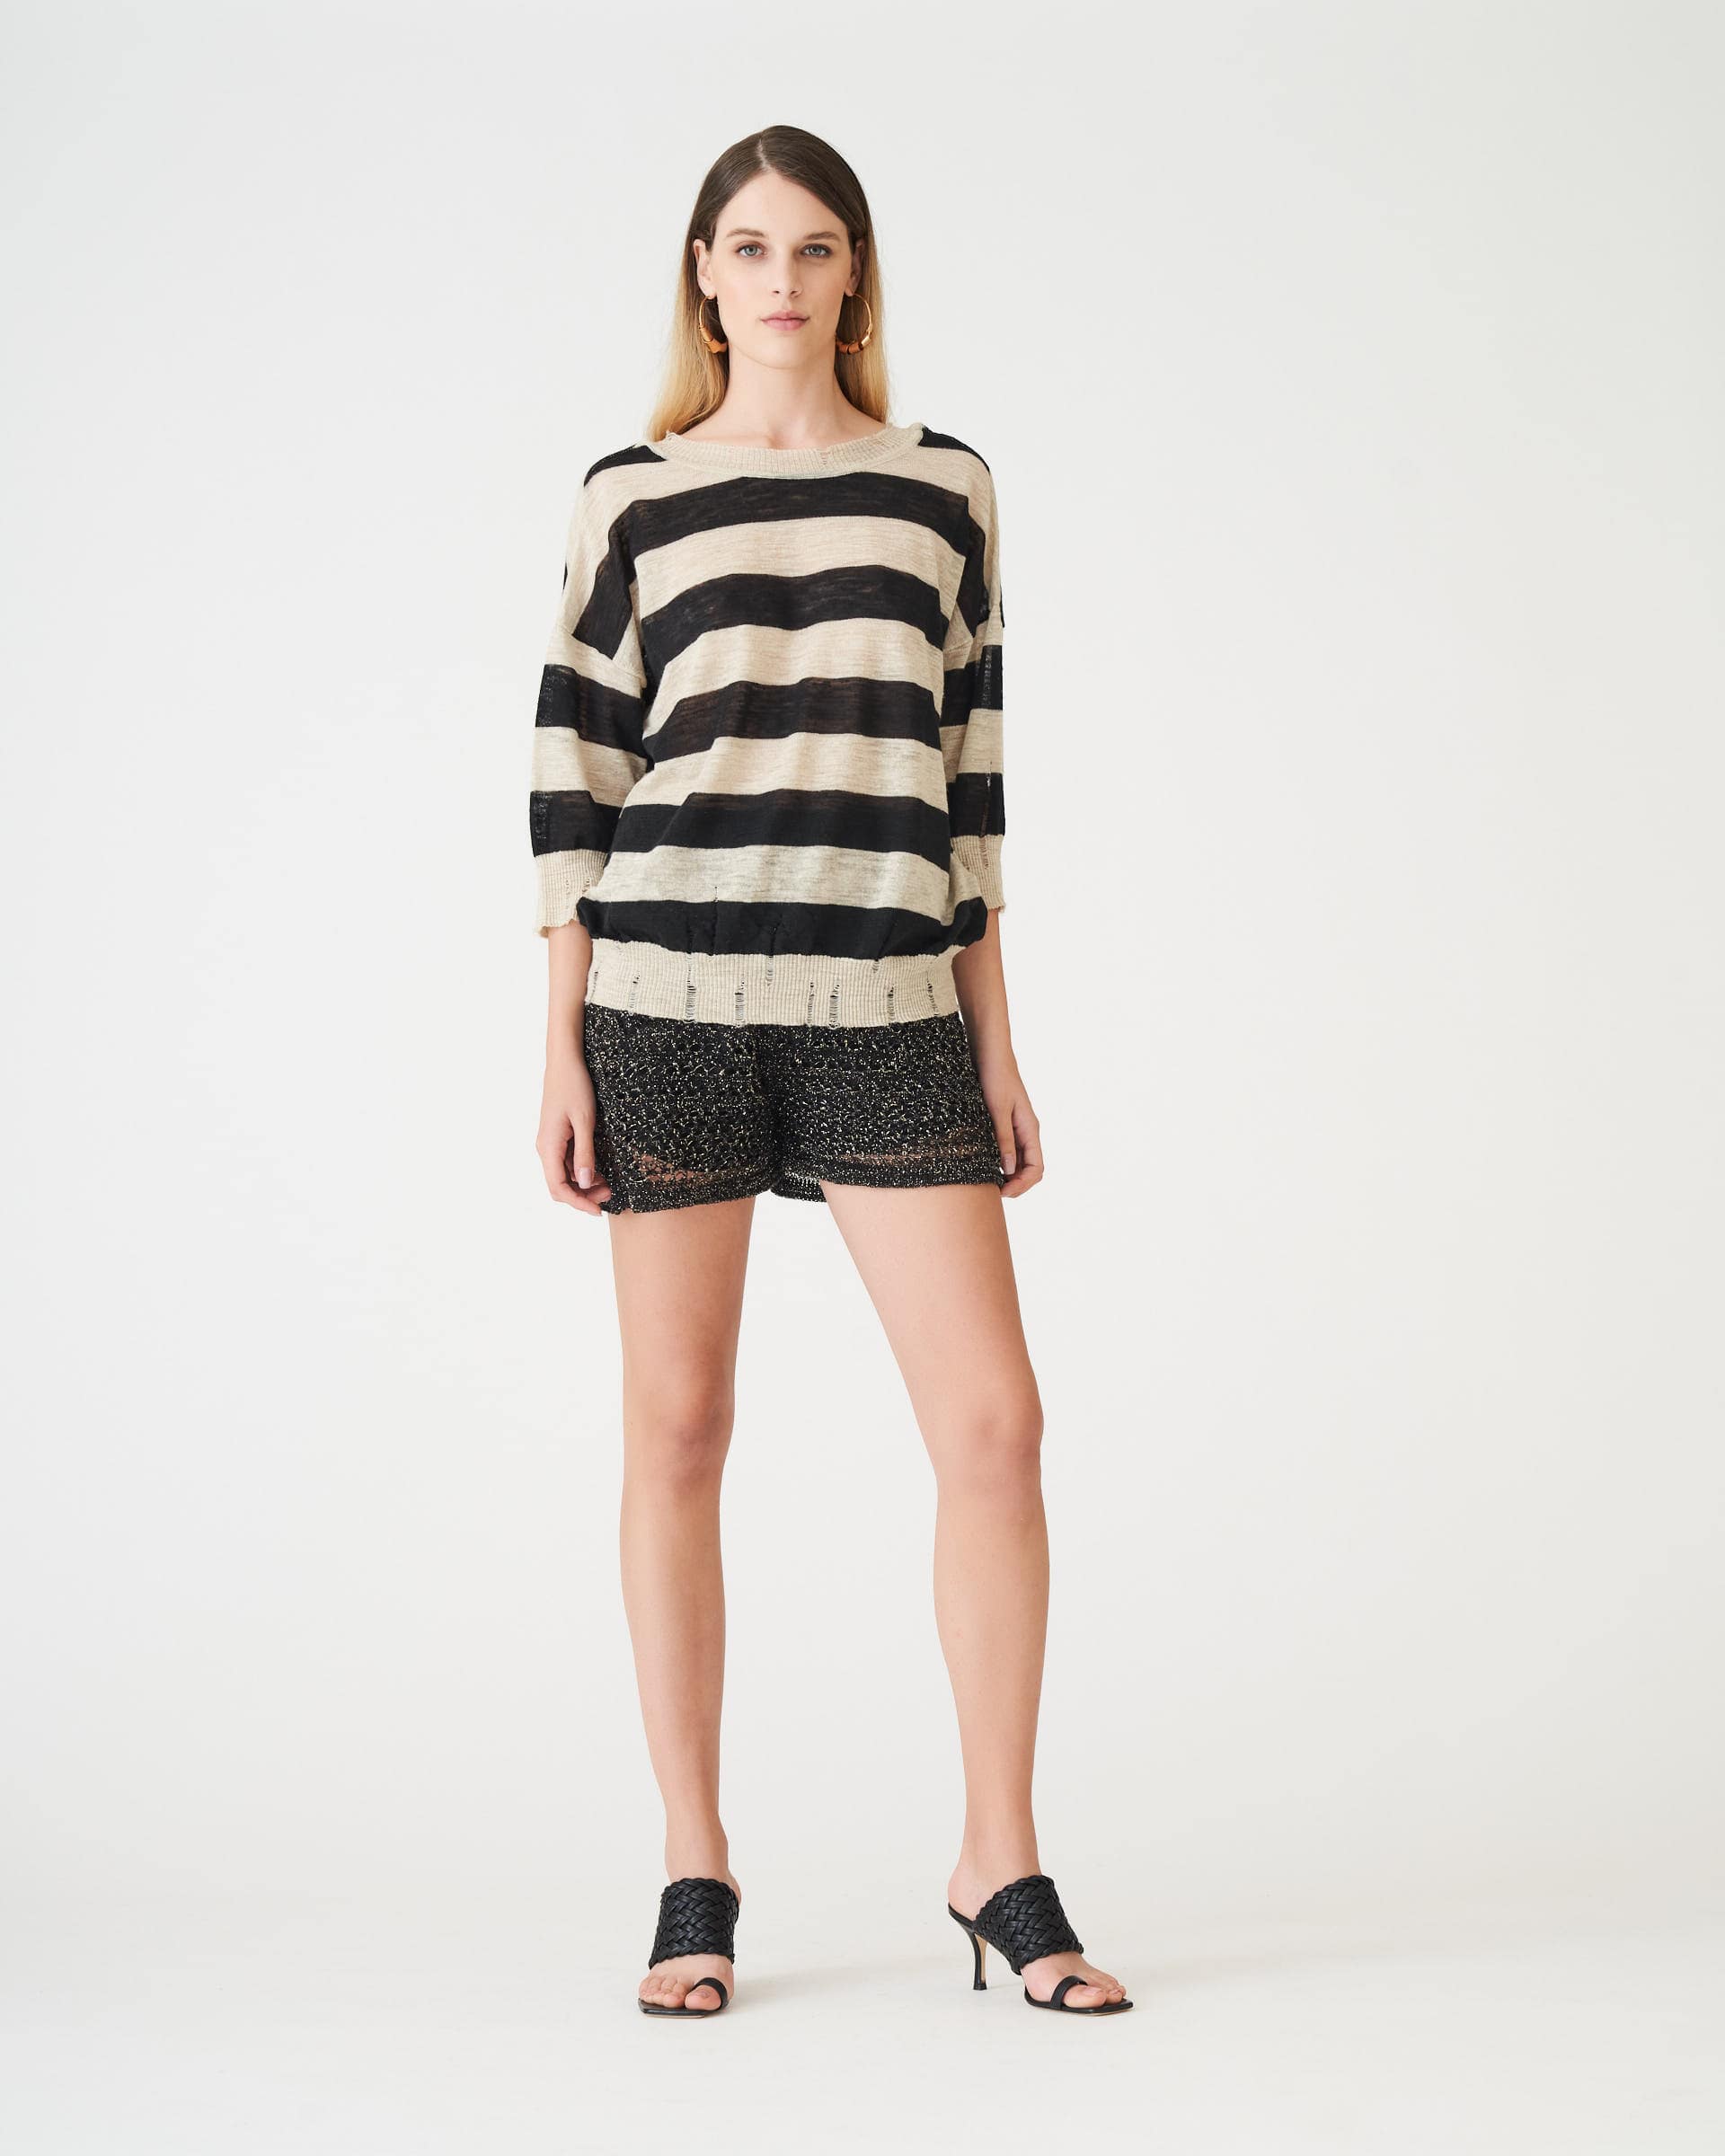 The Market Store | Striped Over Sweater